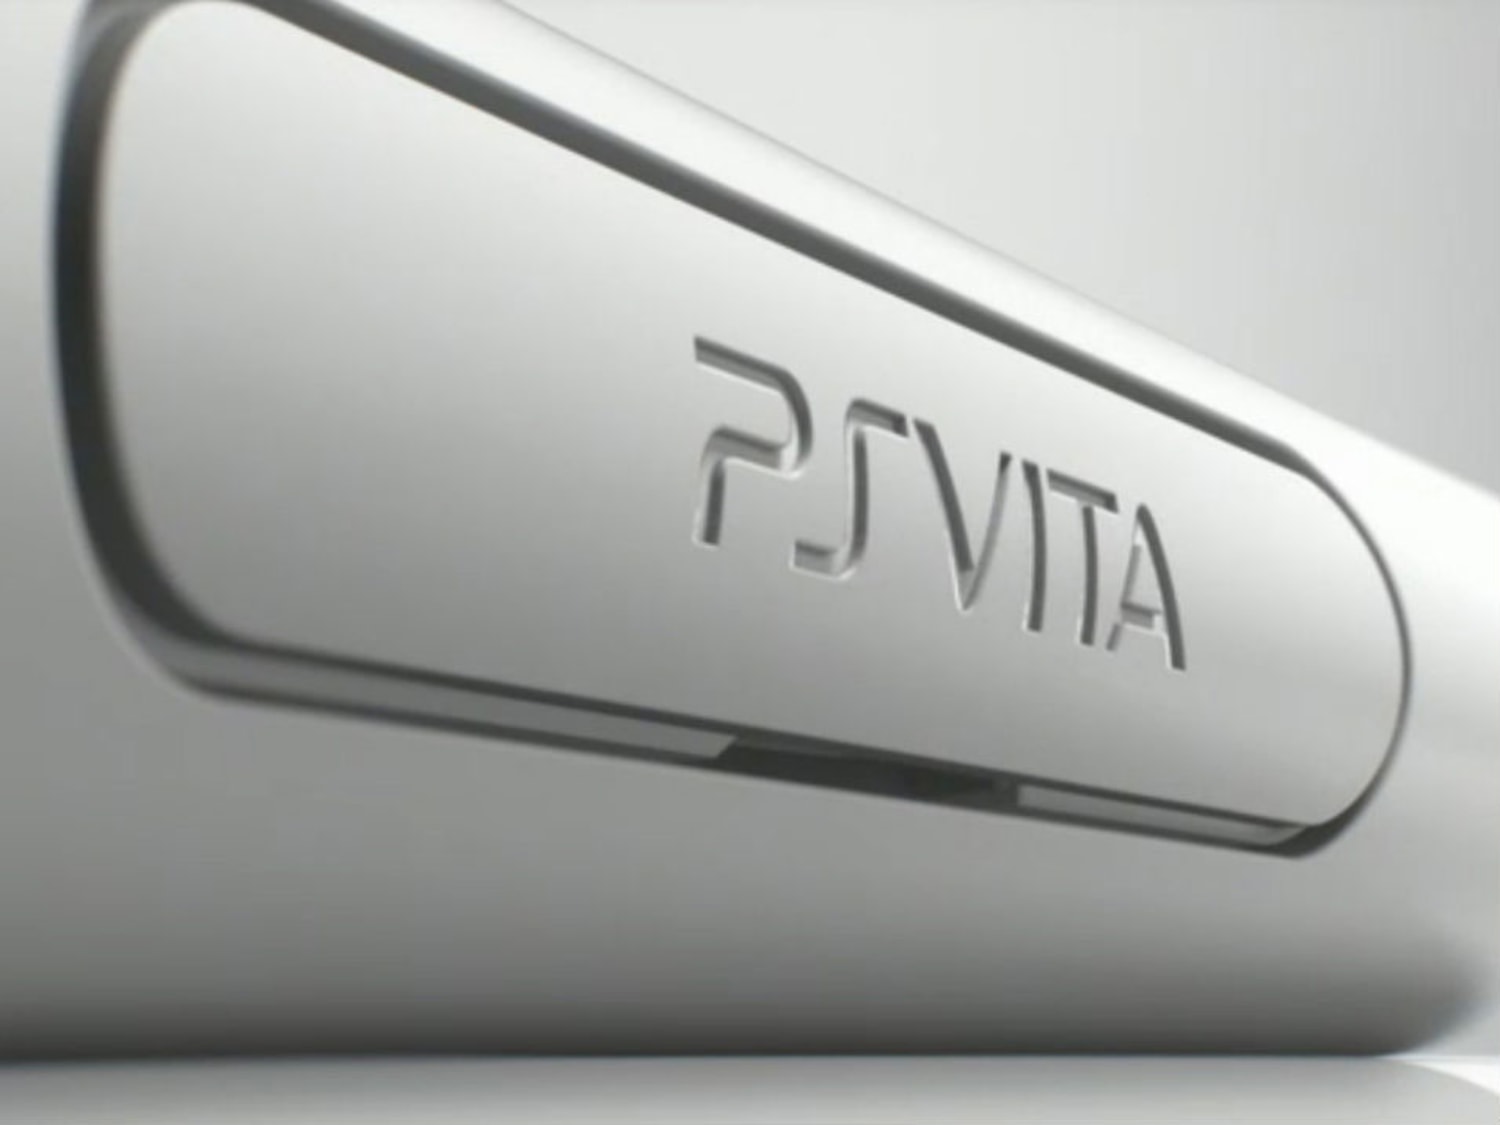 Sony unveils PS Vita TV set-top box for $100